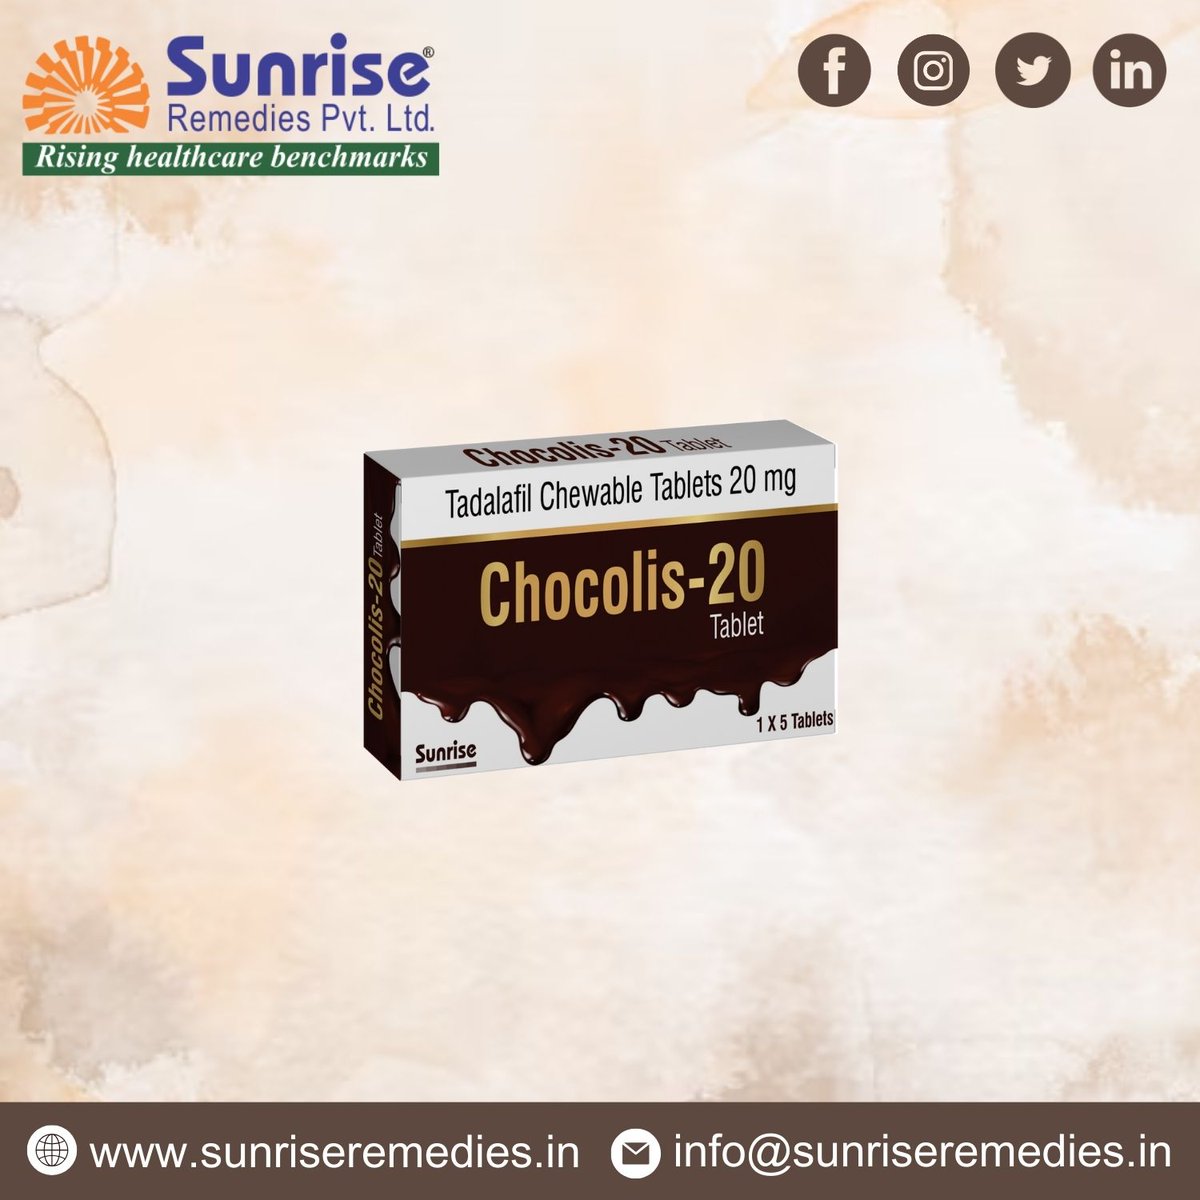 #ChocograChewable Generic Sildenafil Chewable Most Popular Products From Sunrise Remedies Pvt. Ltd.

Read More: sunriseremedies.in/our-products/c…

#ChocograChewable #SildenafilChewable #TadalafilChewable #Vardenafil #Avanafil #Udenafil #Dapoxetine #EDProducts #PEProducts #PharmaExport